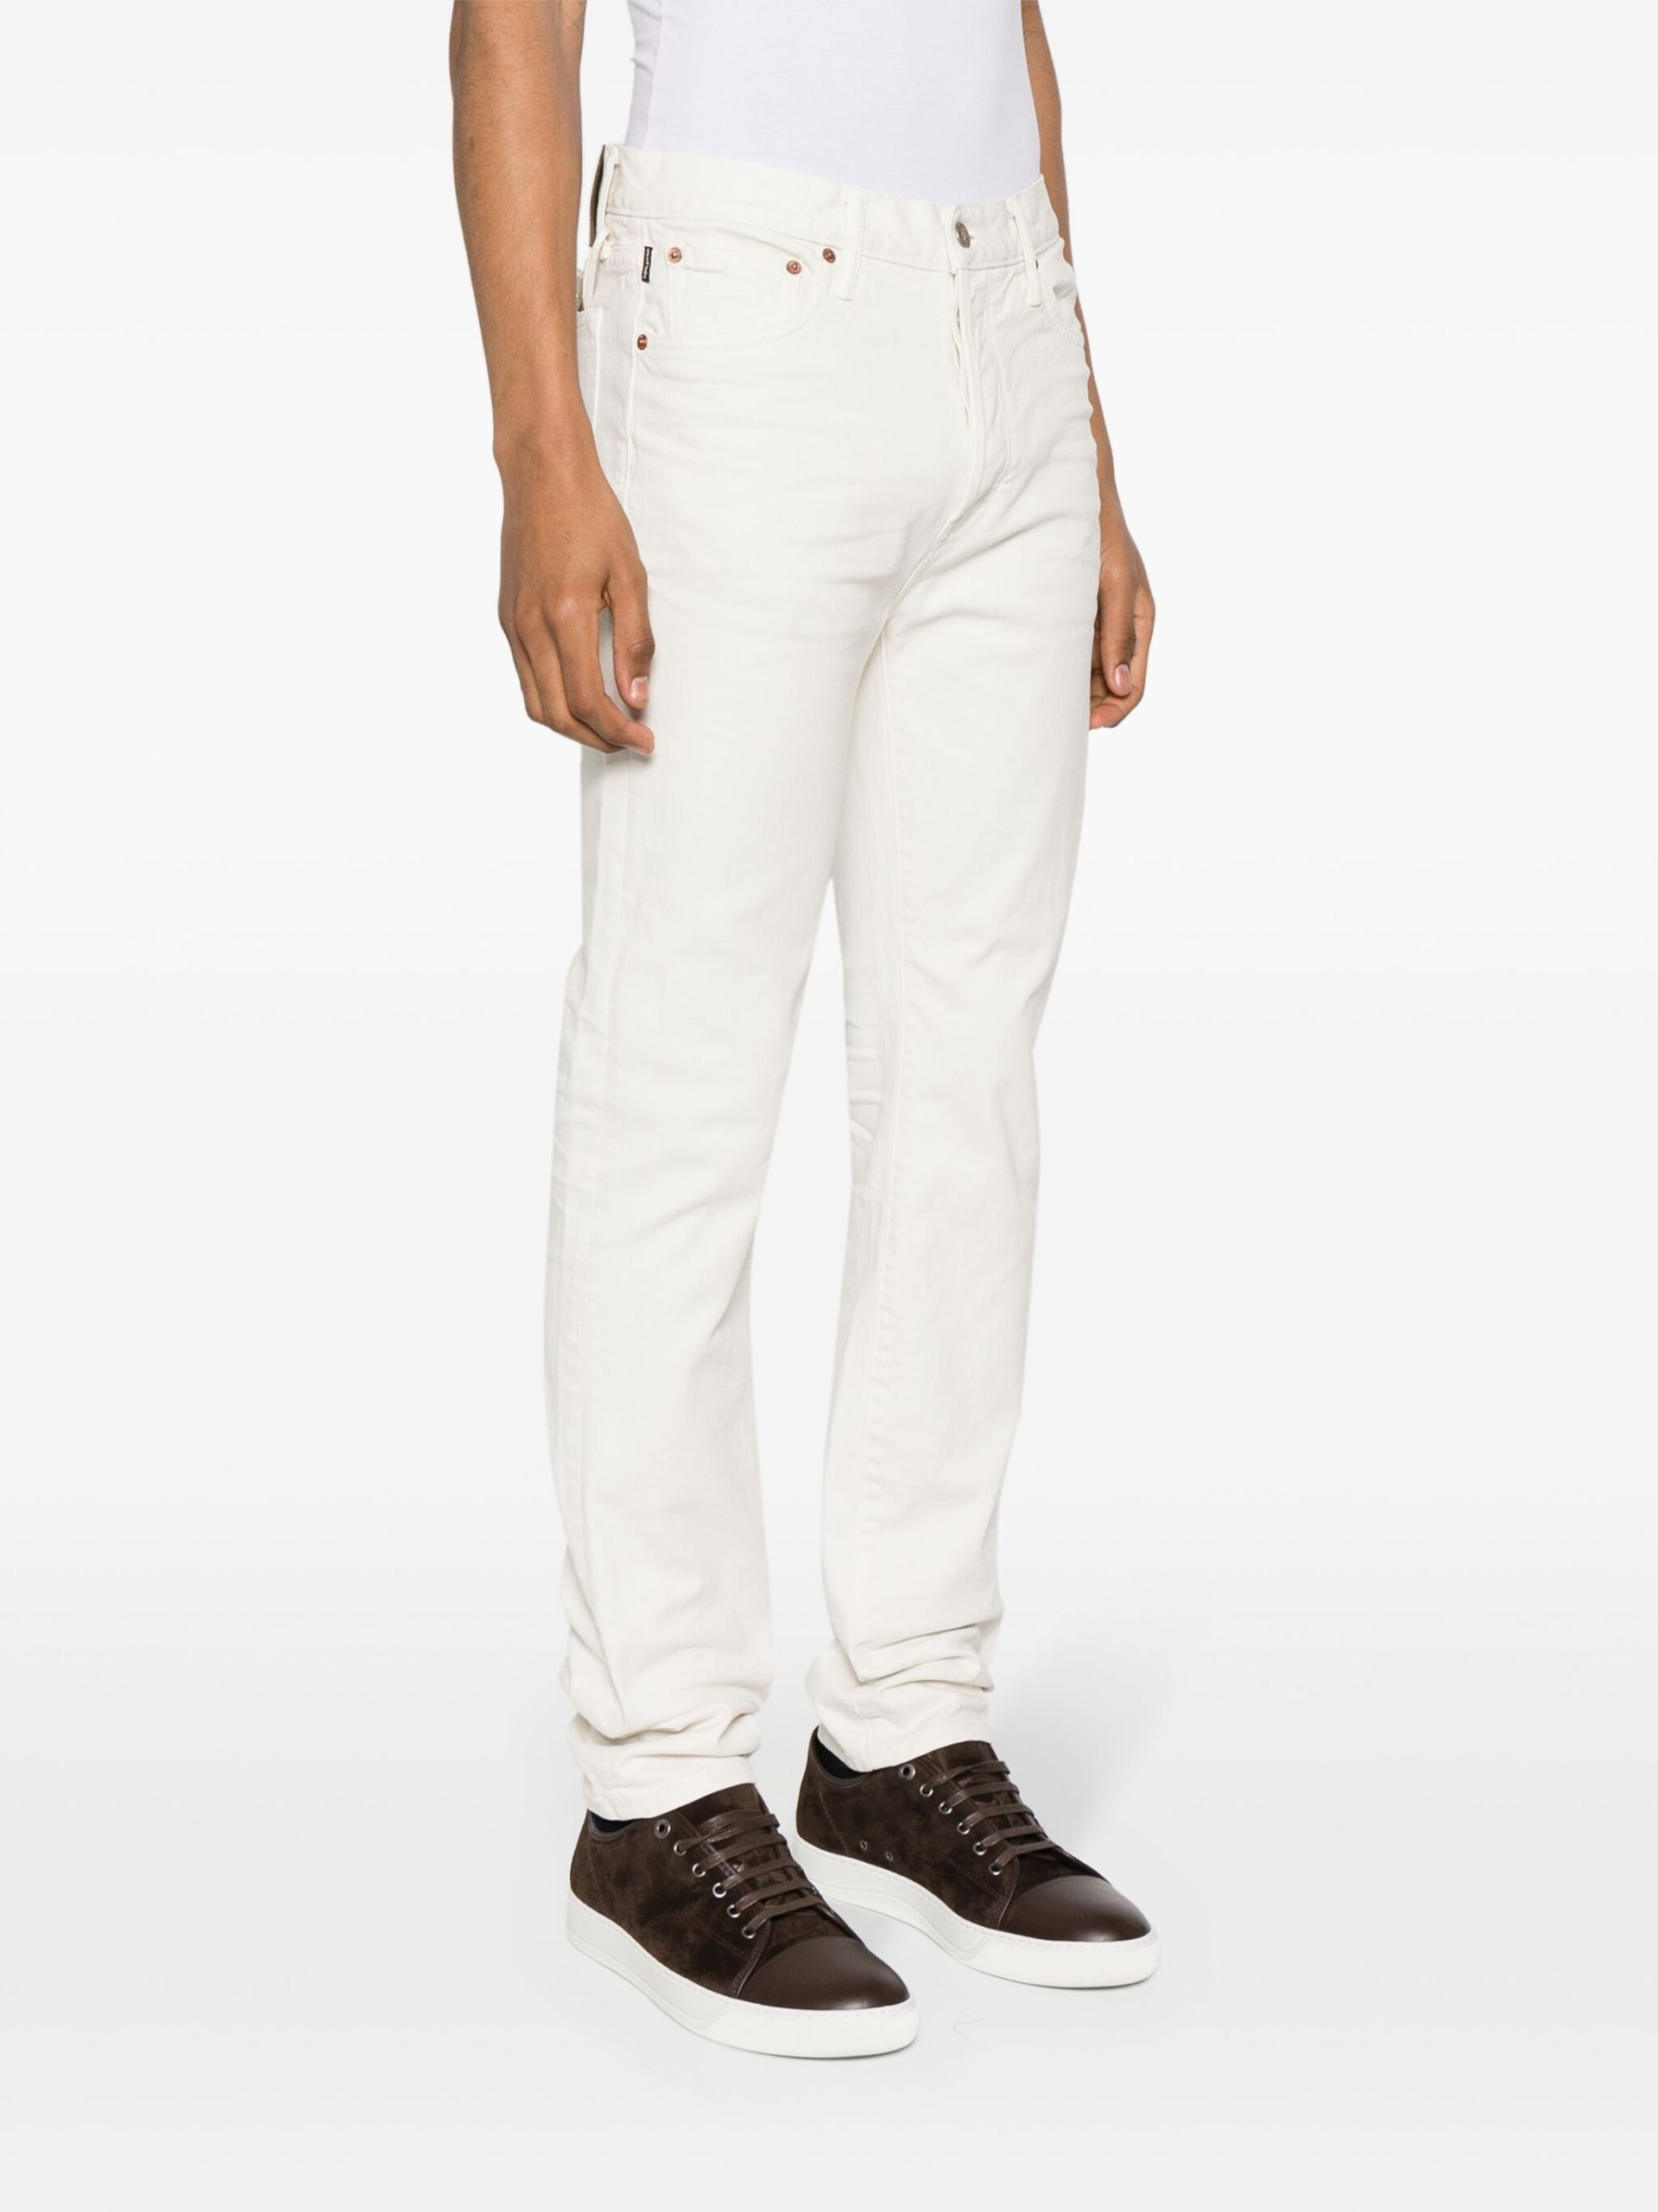 White Whiskering-Effect Jeans - 3